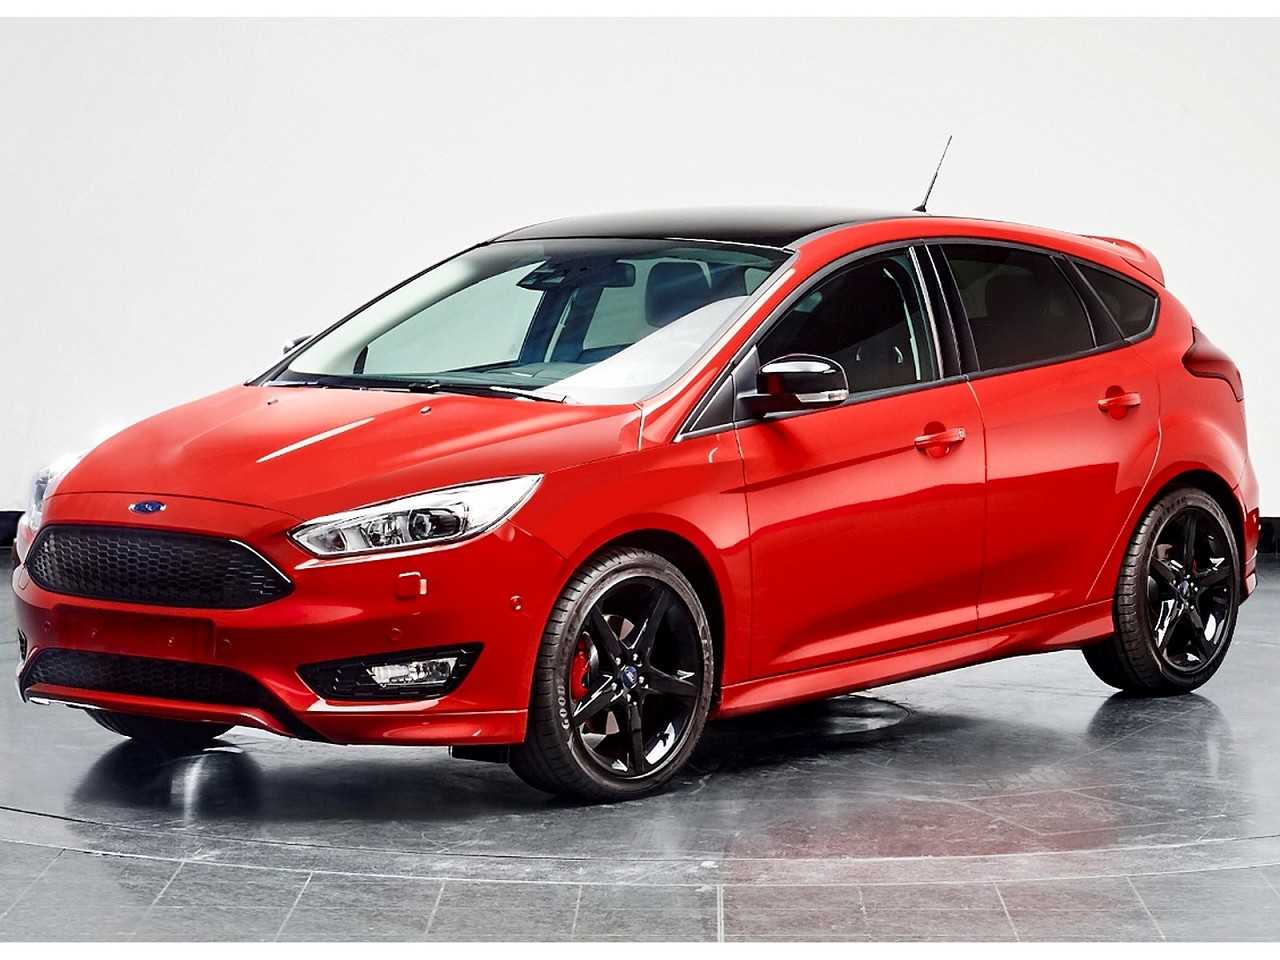 FordFocus 2015 - ngulo frontal